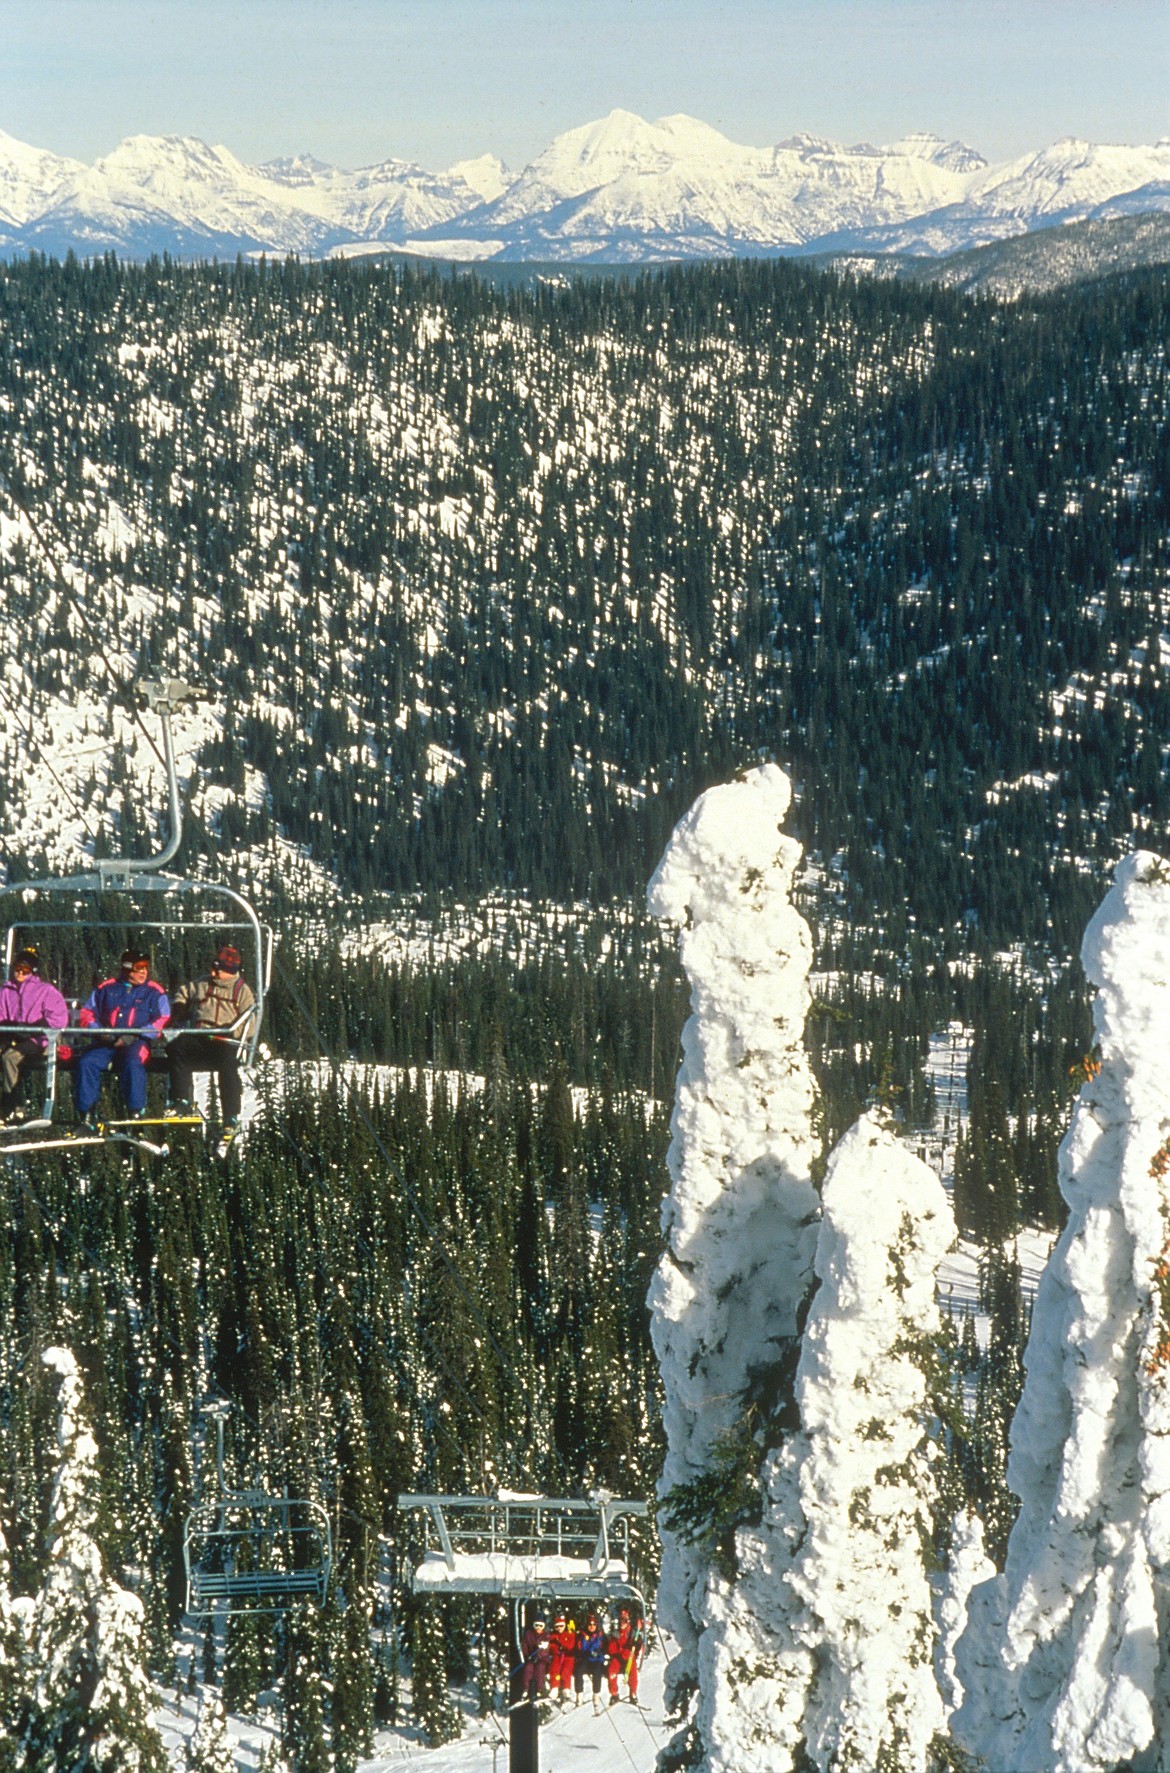 Skiers ride Chair 7 at Whitefish Mountain Resort in this undated photo. (Photo courtesy of Whitefish Mountain Resort)